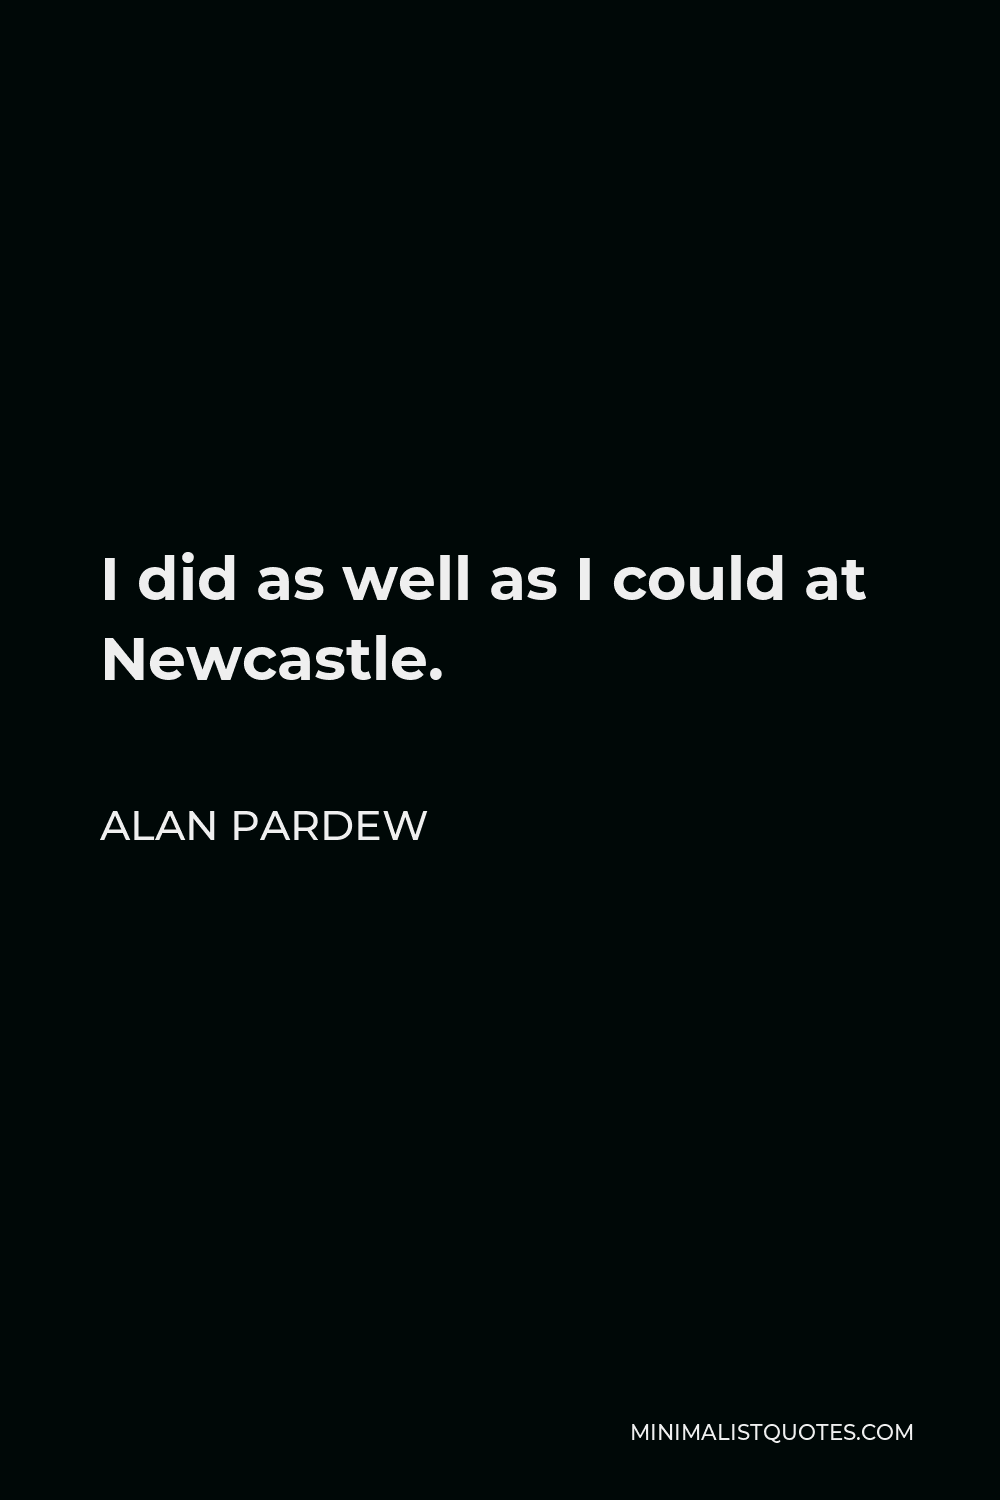 Alan Pardew Quote - I did as well as I could at Newcastle.